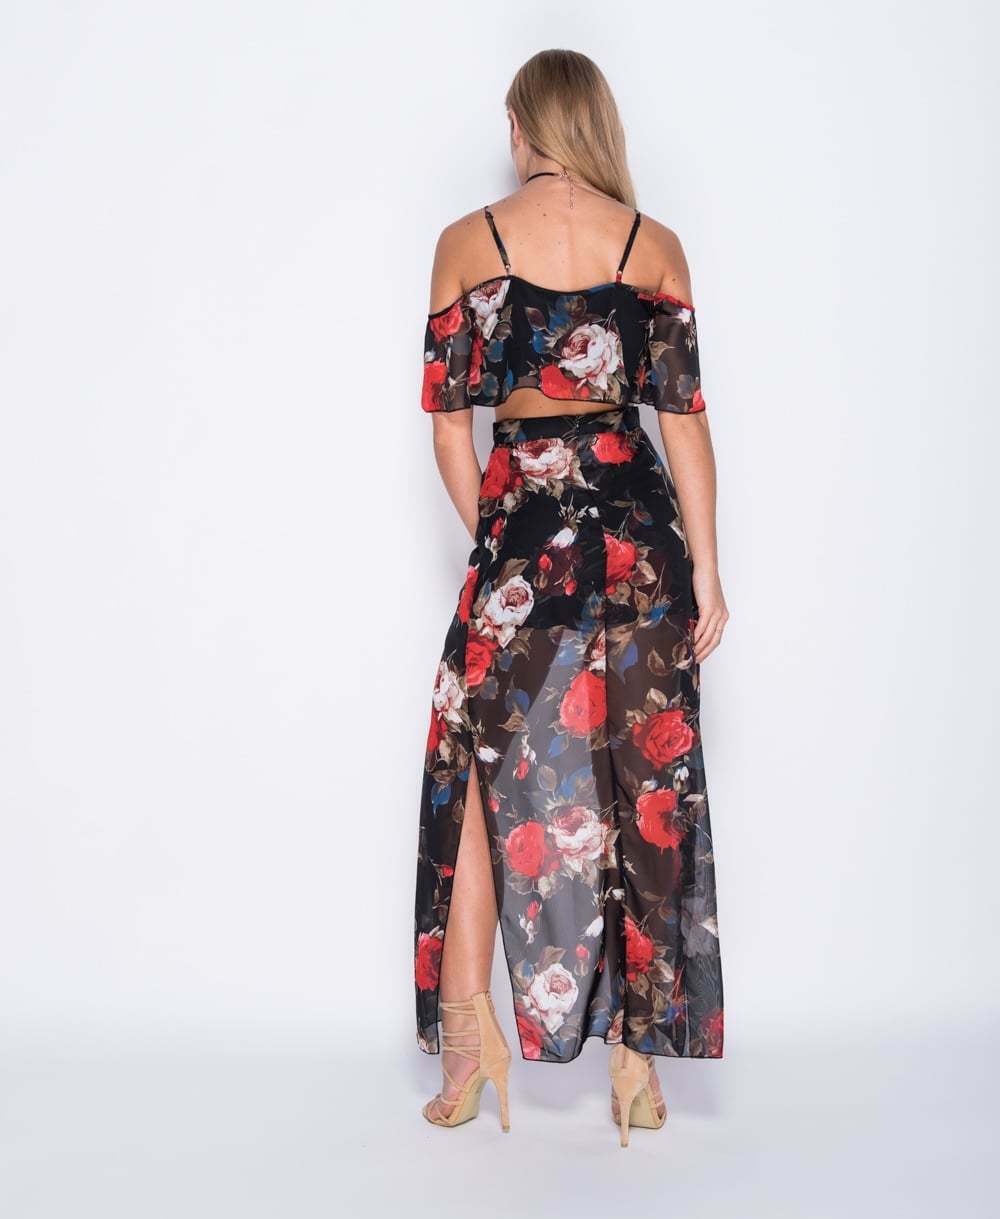 Floral Printed Co-ord Set in Black - Rear View